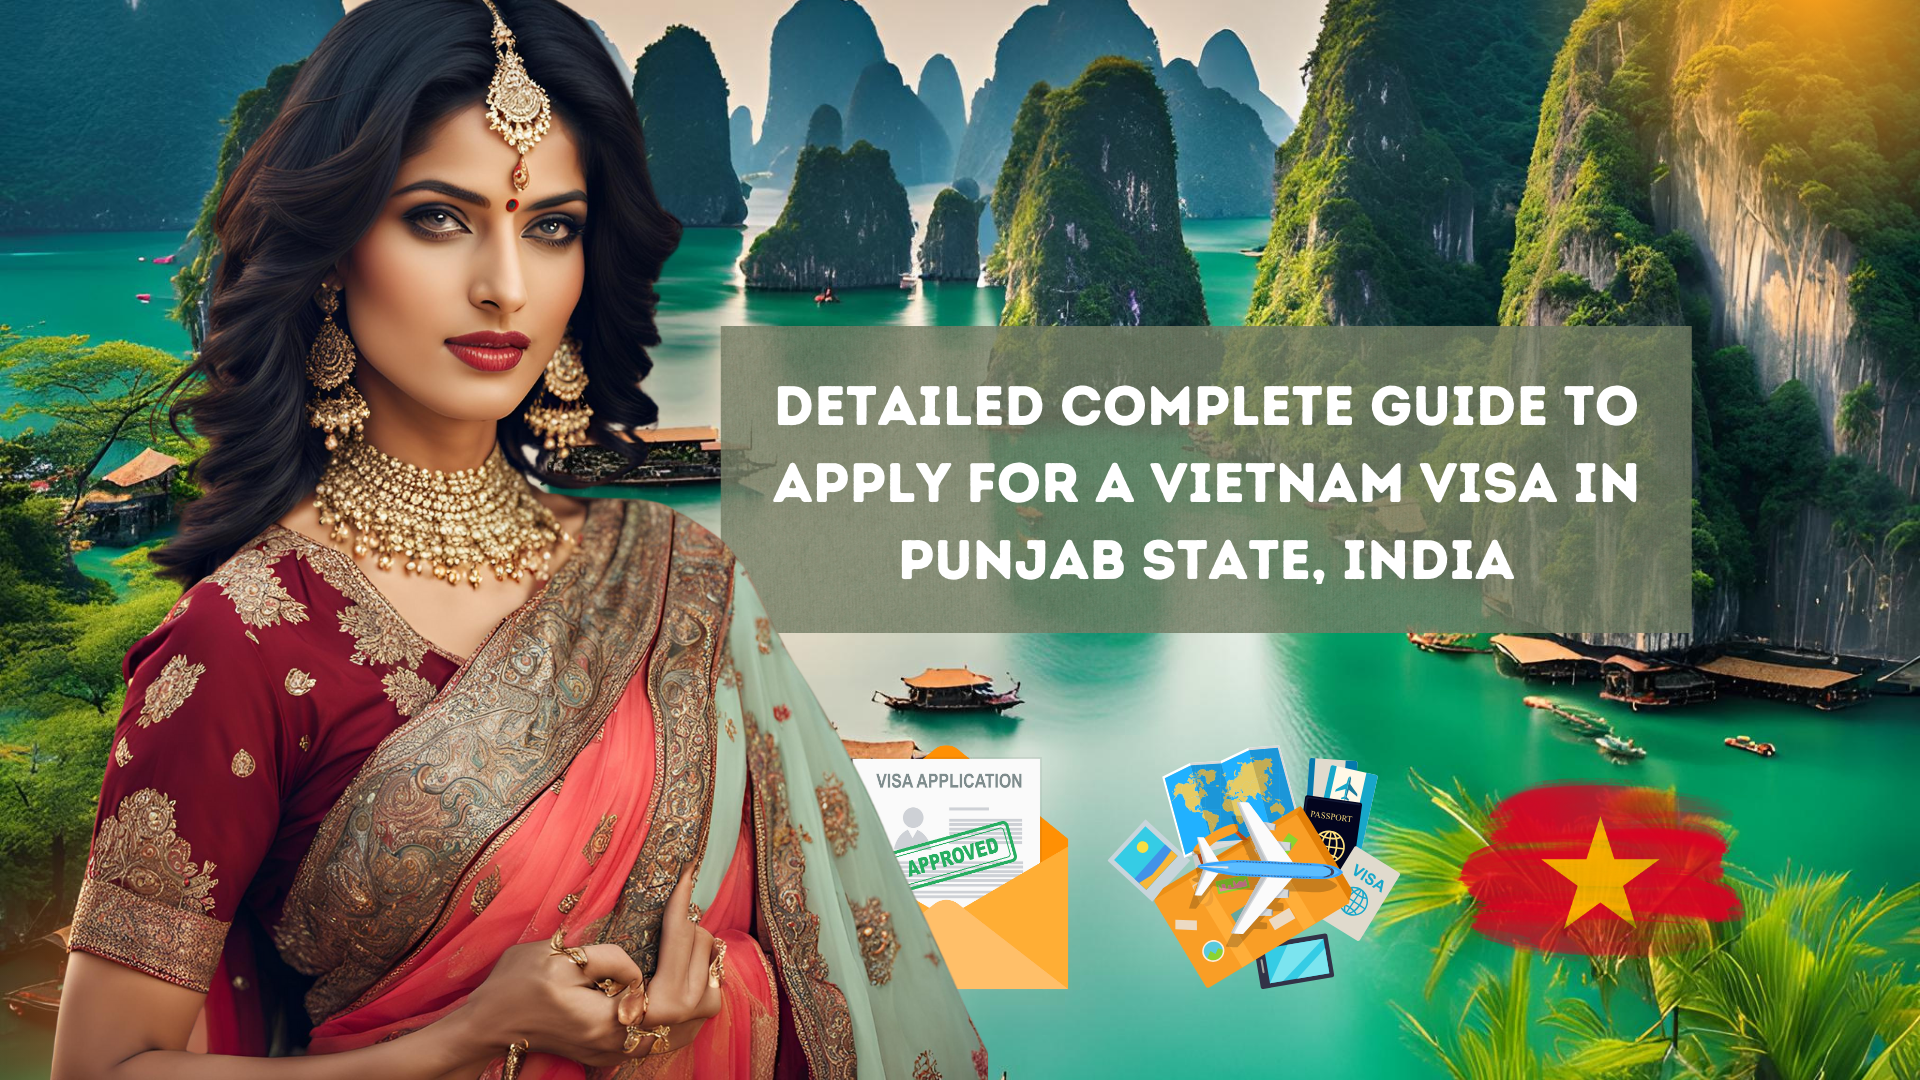 Detailed Complete Guide to Apply for a Vietnam Visa in Punjab State, India